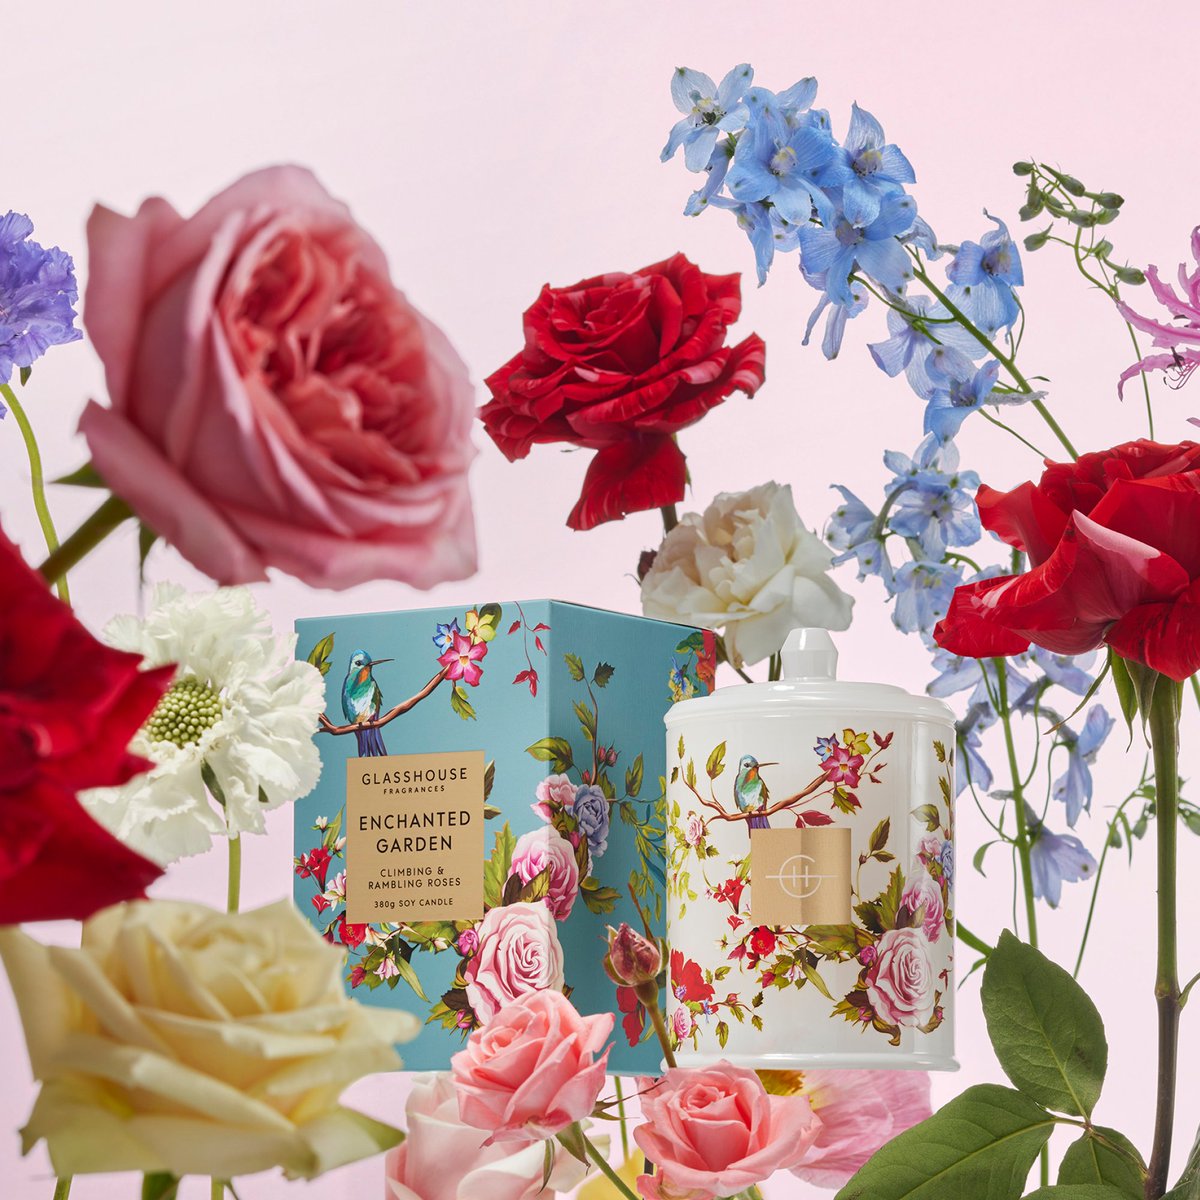 This Limited Edition Enchanted Garden Scented Candle from @glasshousefragrances is the perfect Mother’s Day gift that she will love! Shop now: tinyurl.com/yc7x5dwk